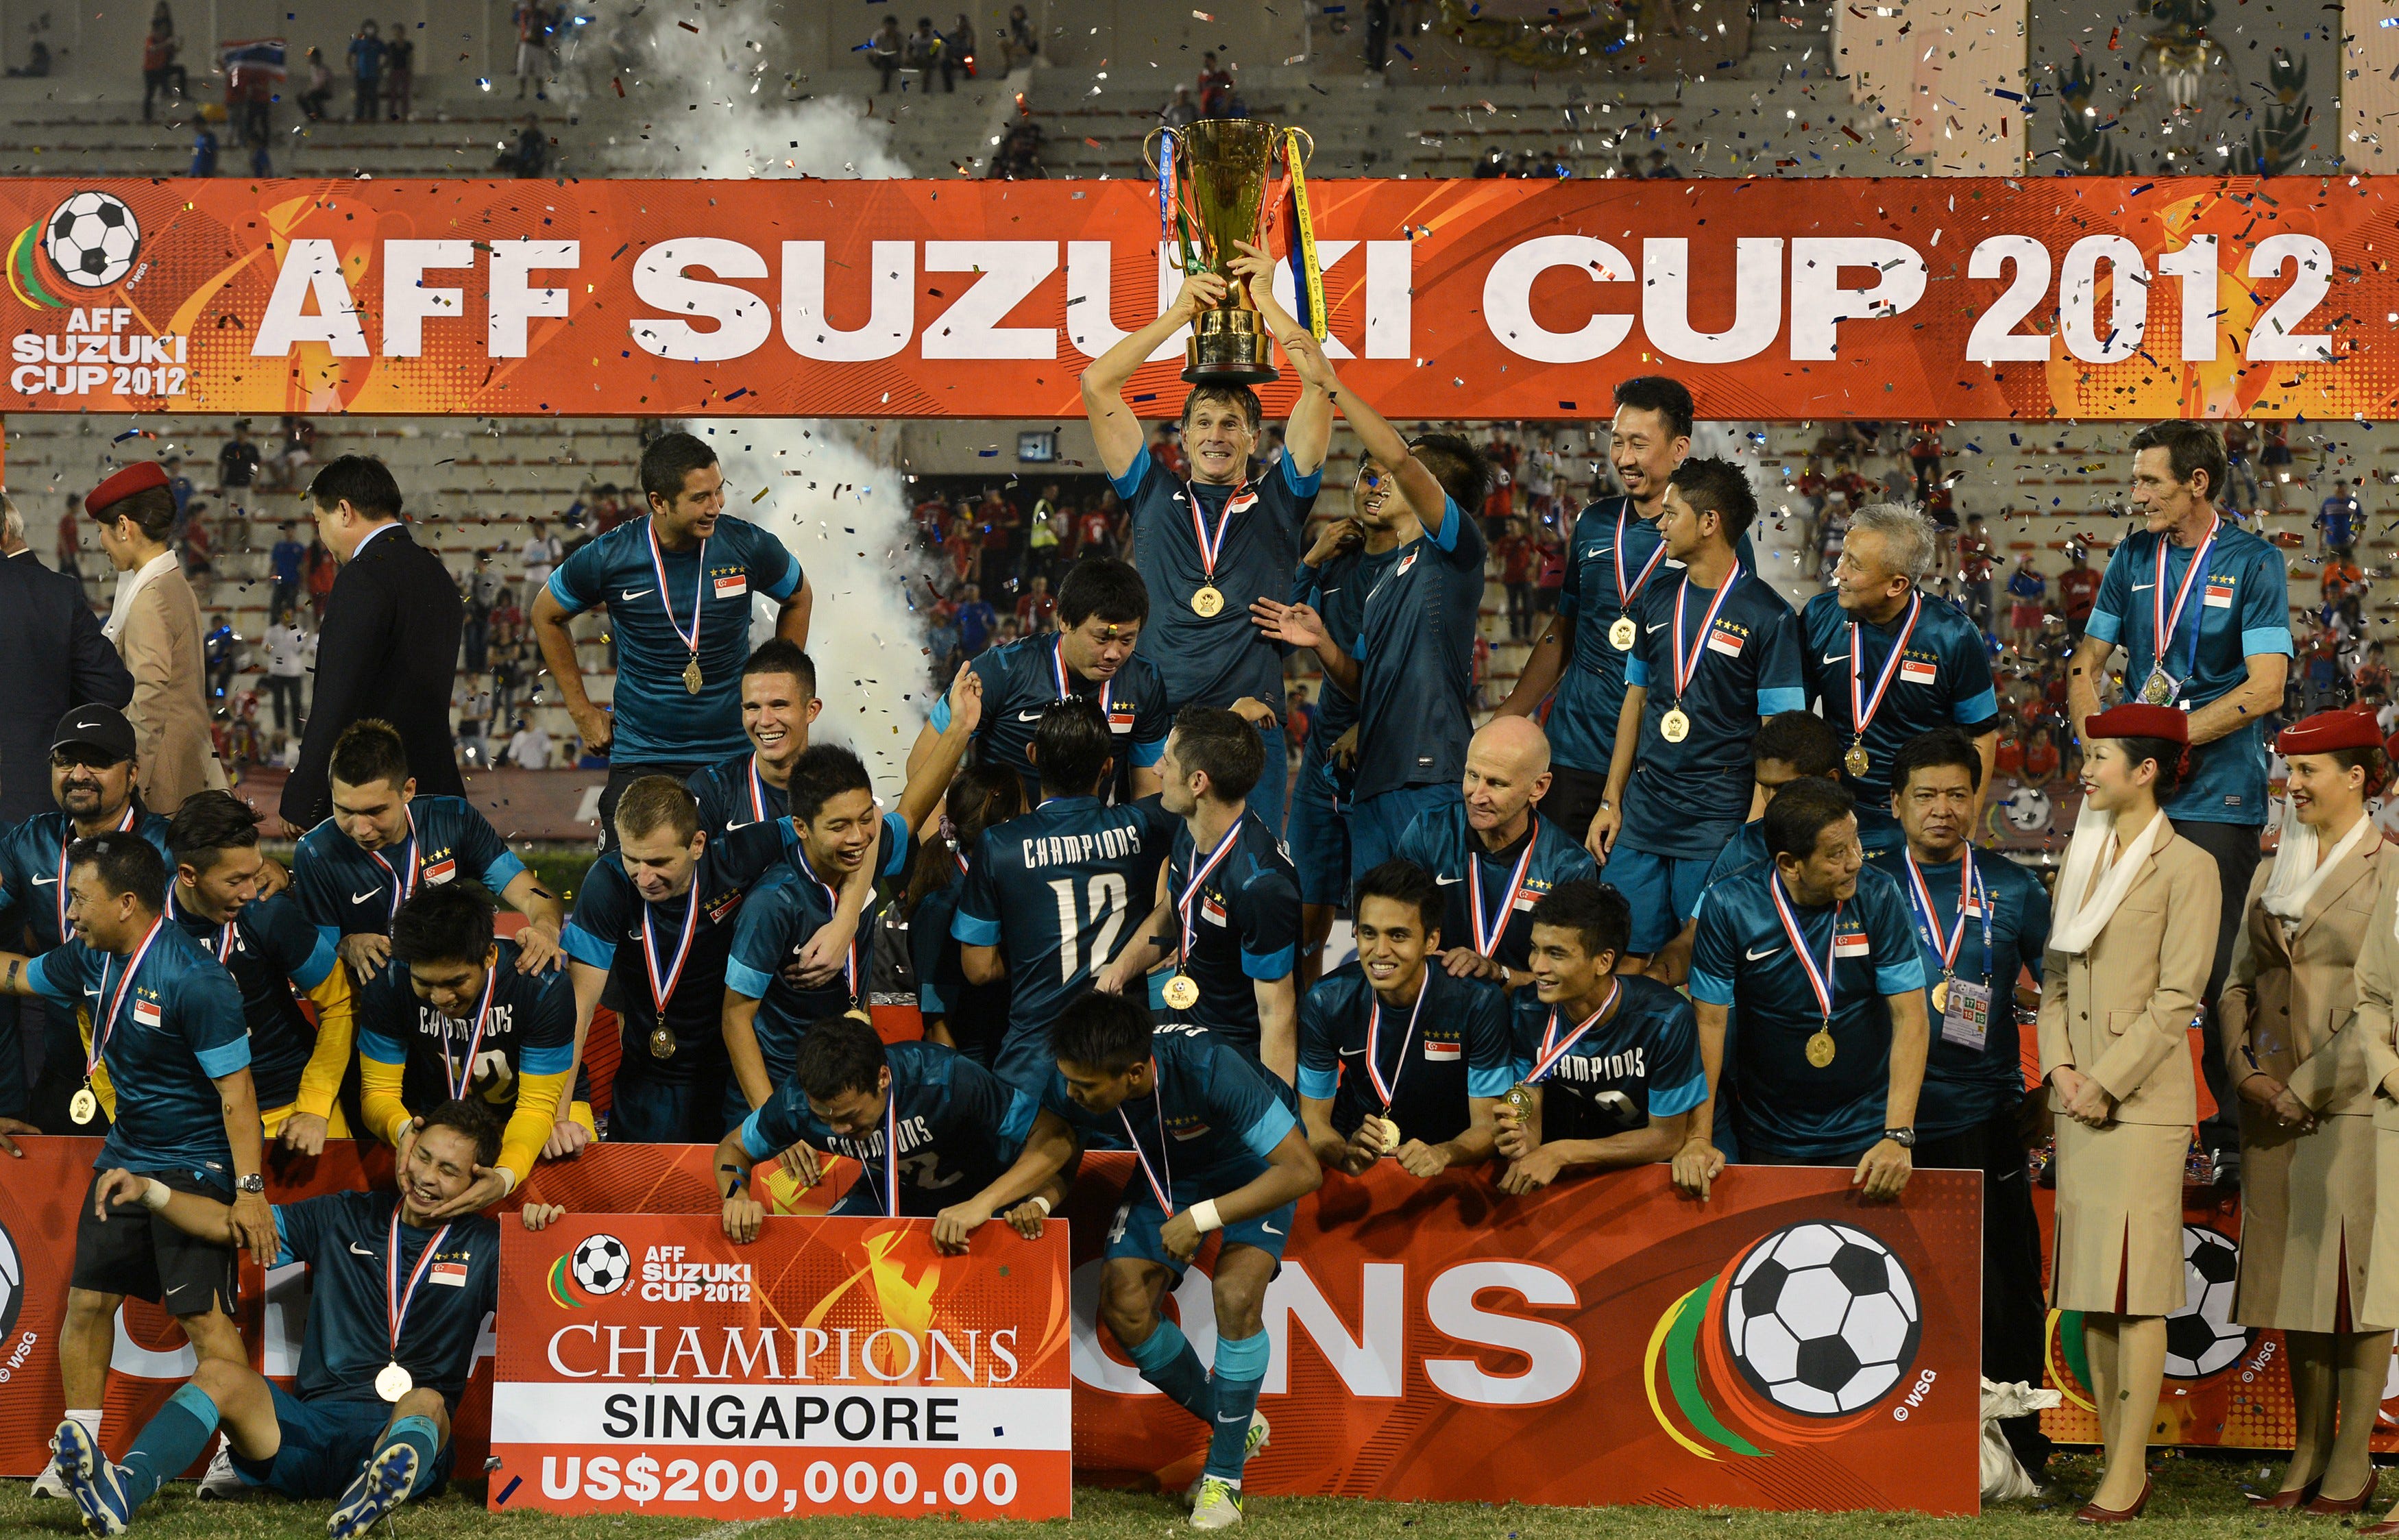 Singapore celebrating their 2012 AFF Cup title